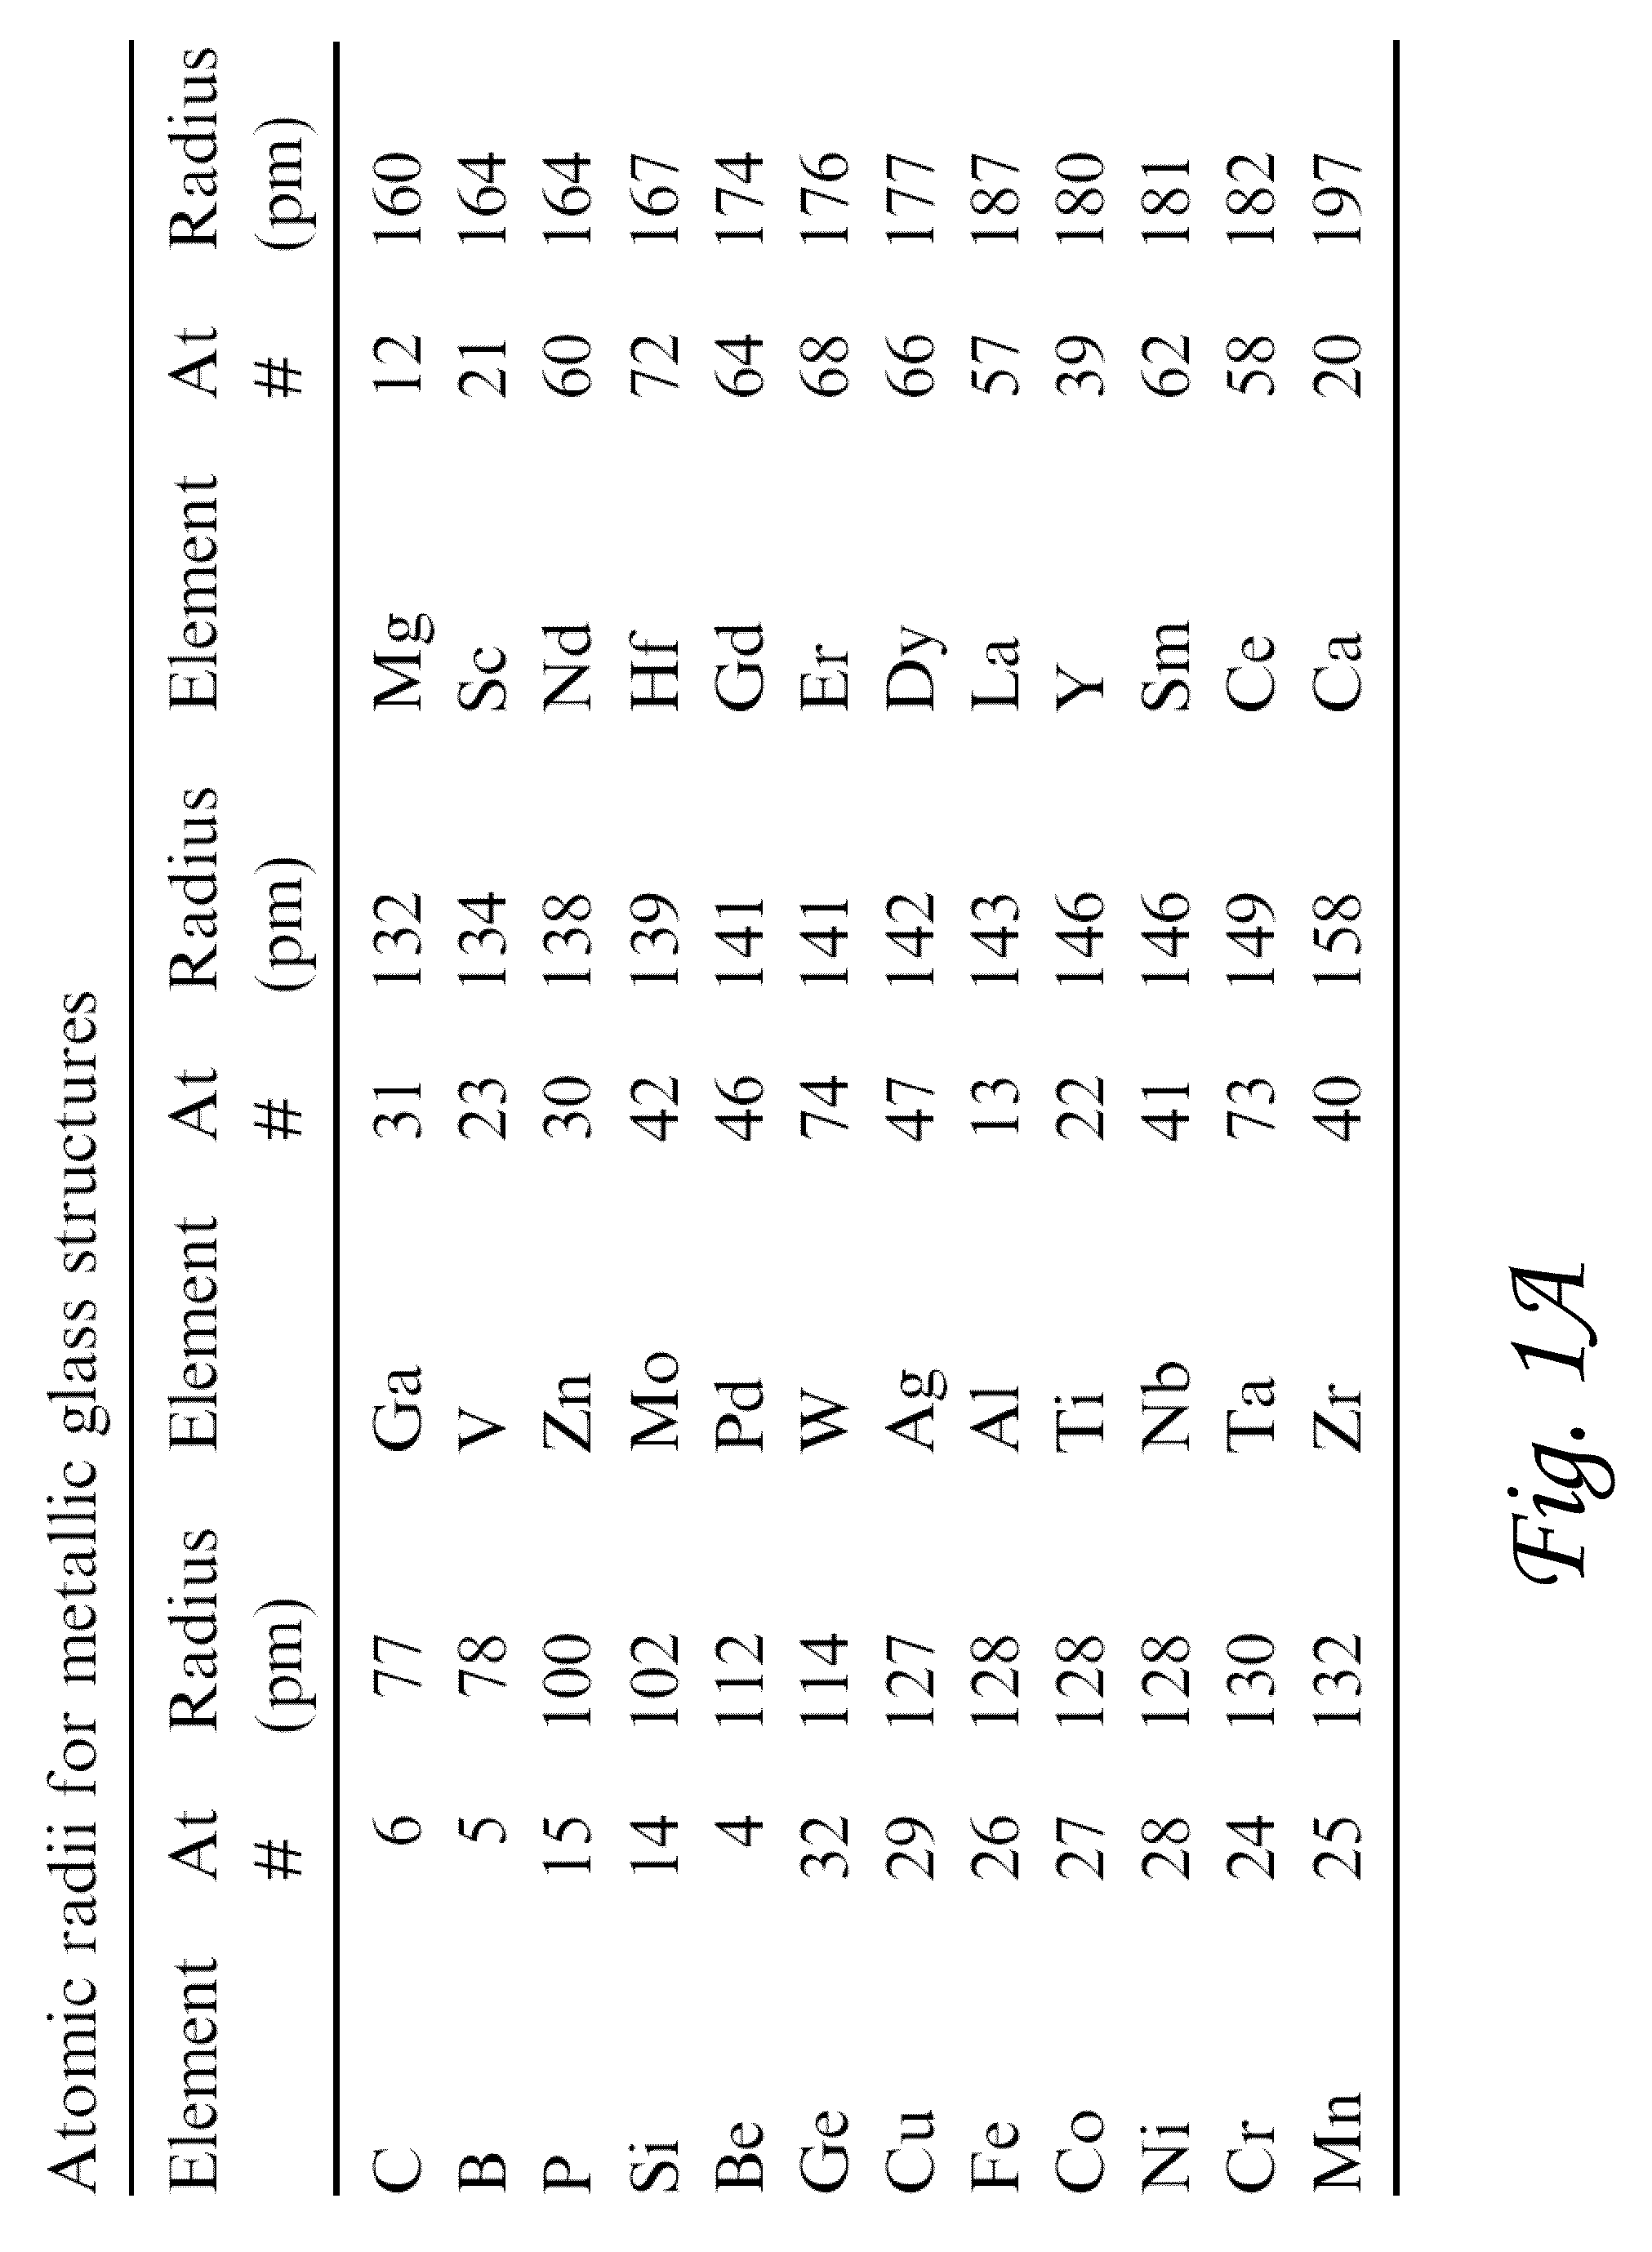 Compositions and methods for determining alloys for thermal spray, weld overlay, thermal spray post processing applications, and castings